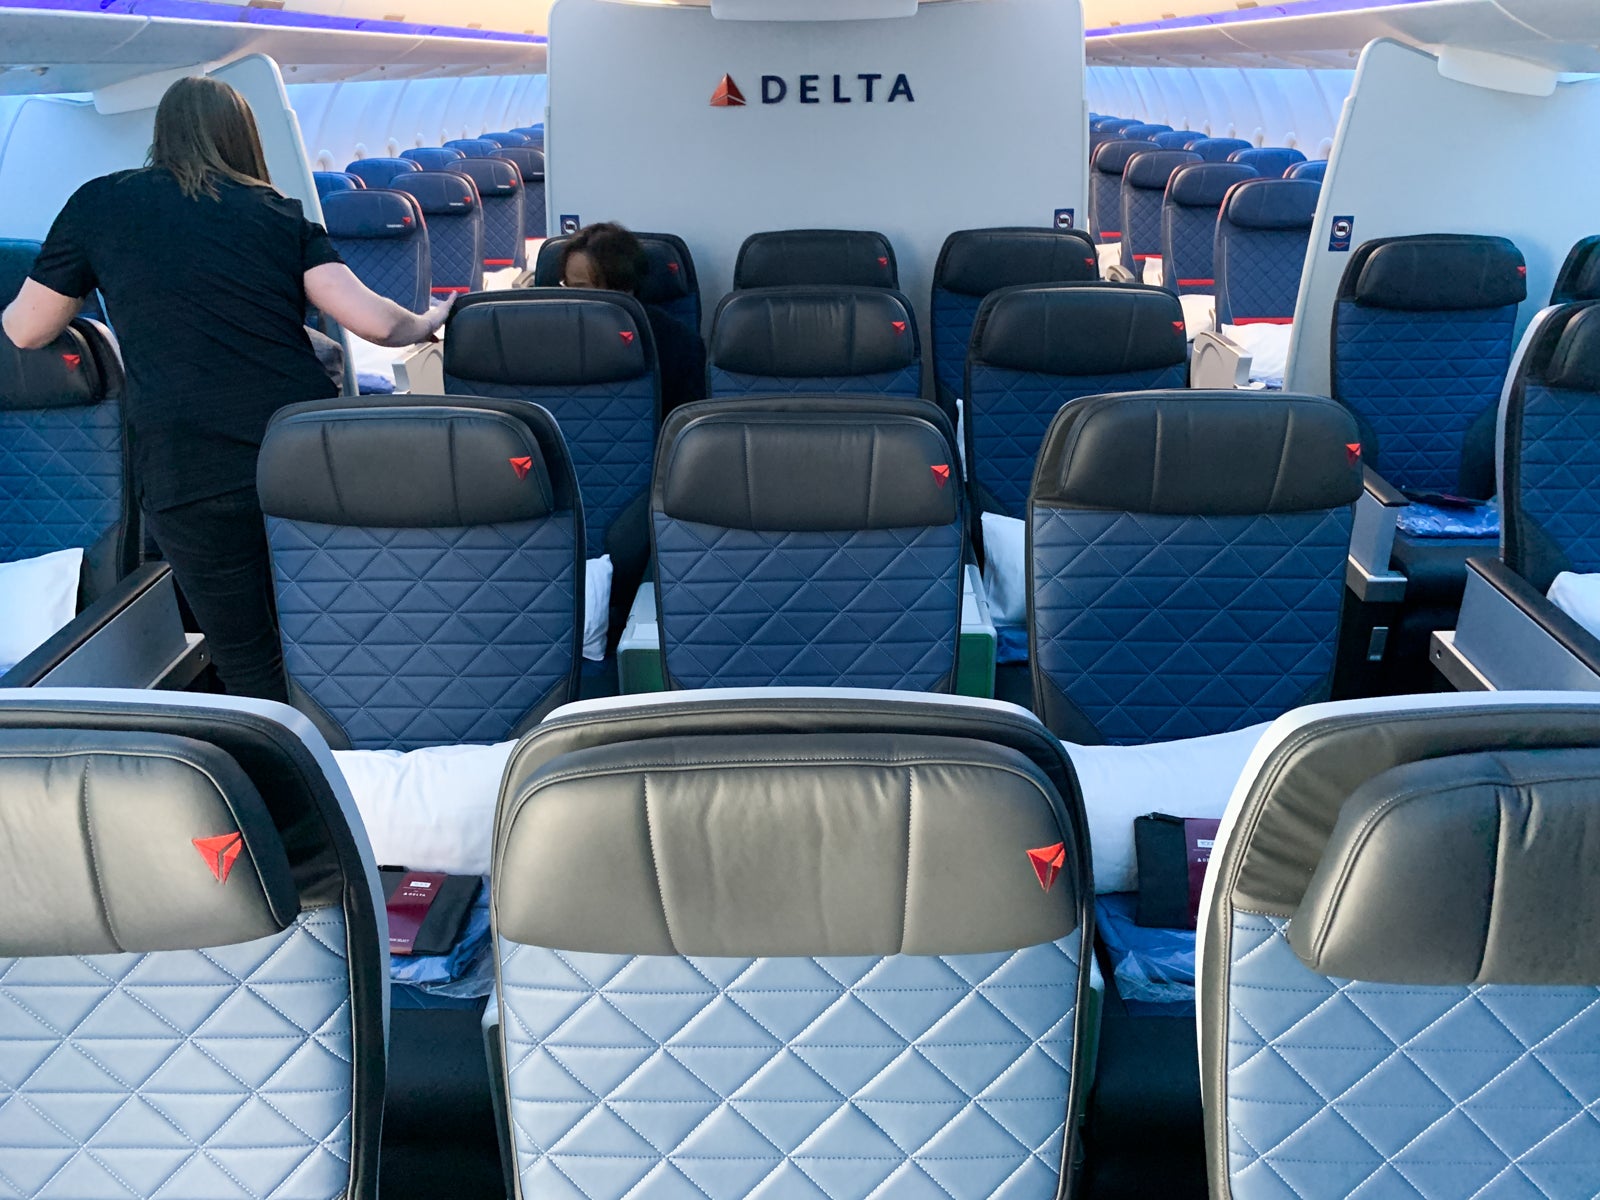 Treat yourself with Delta Premium Select